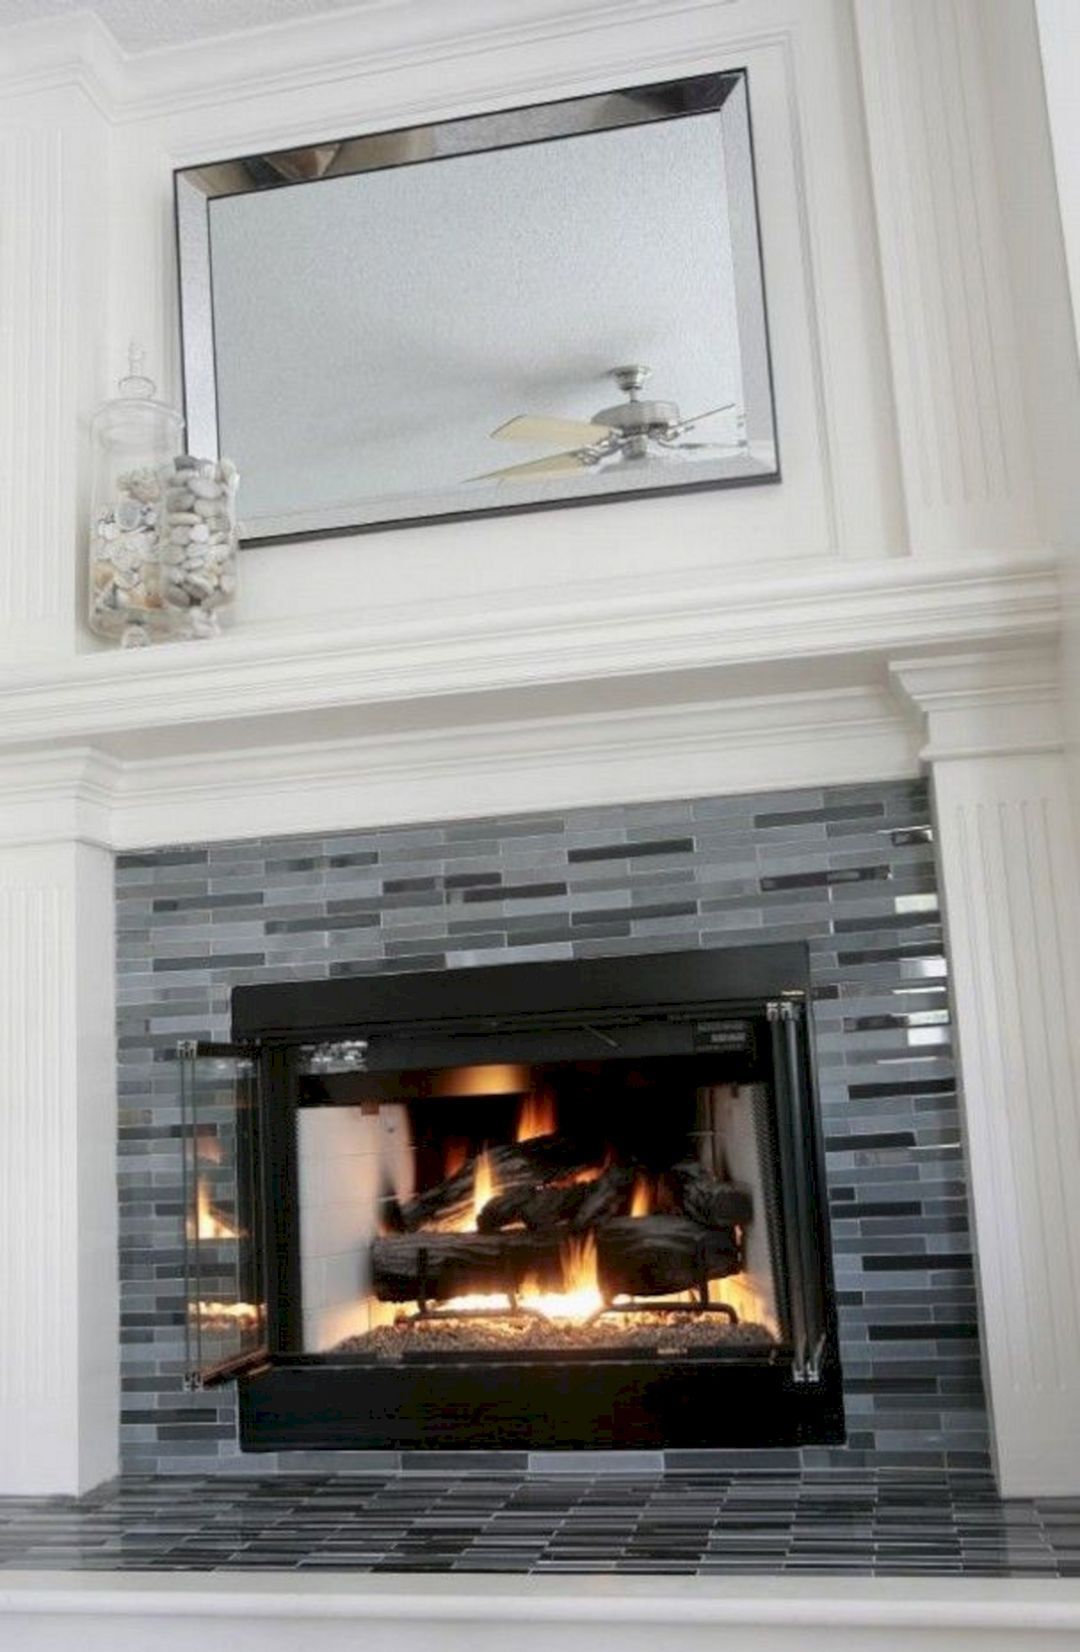 Tile Around Fireplace Luxury 22 Wonderful Fireplace Tile Design for Amazing Home